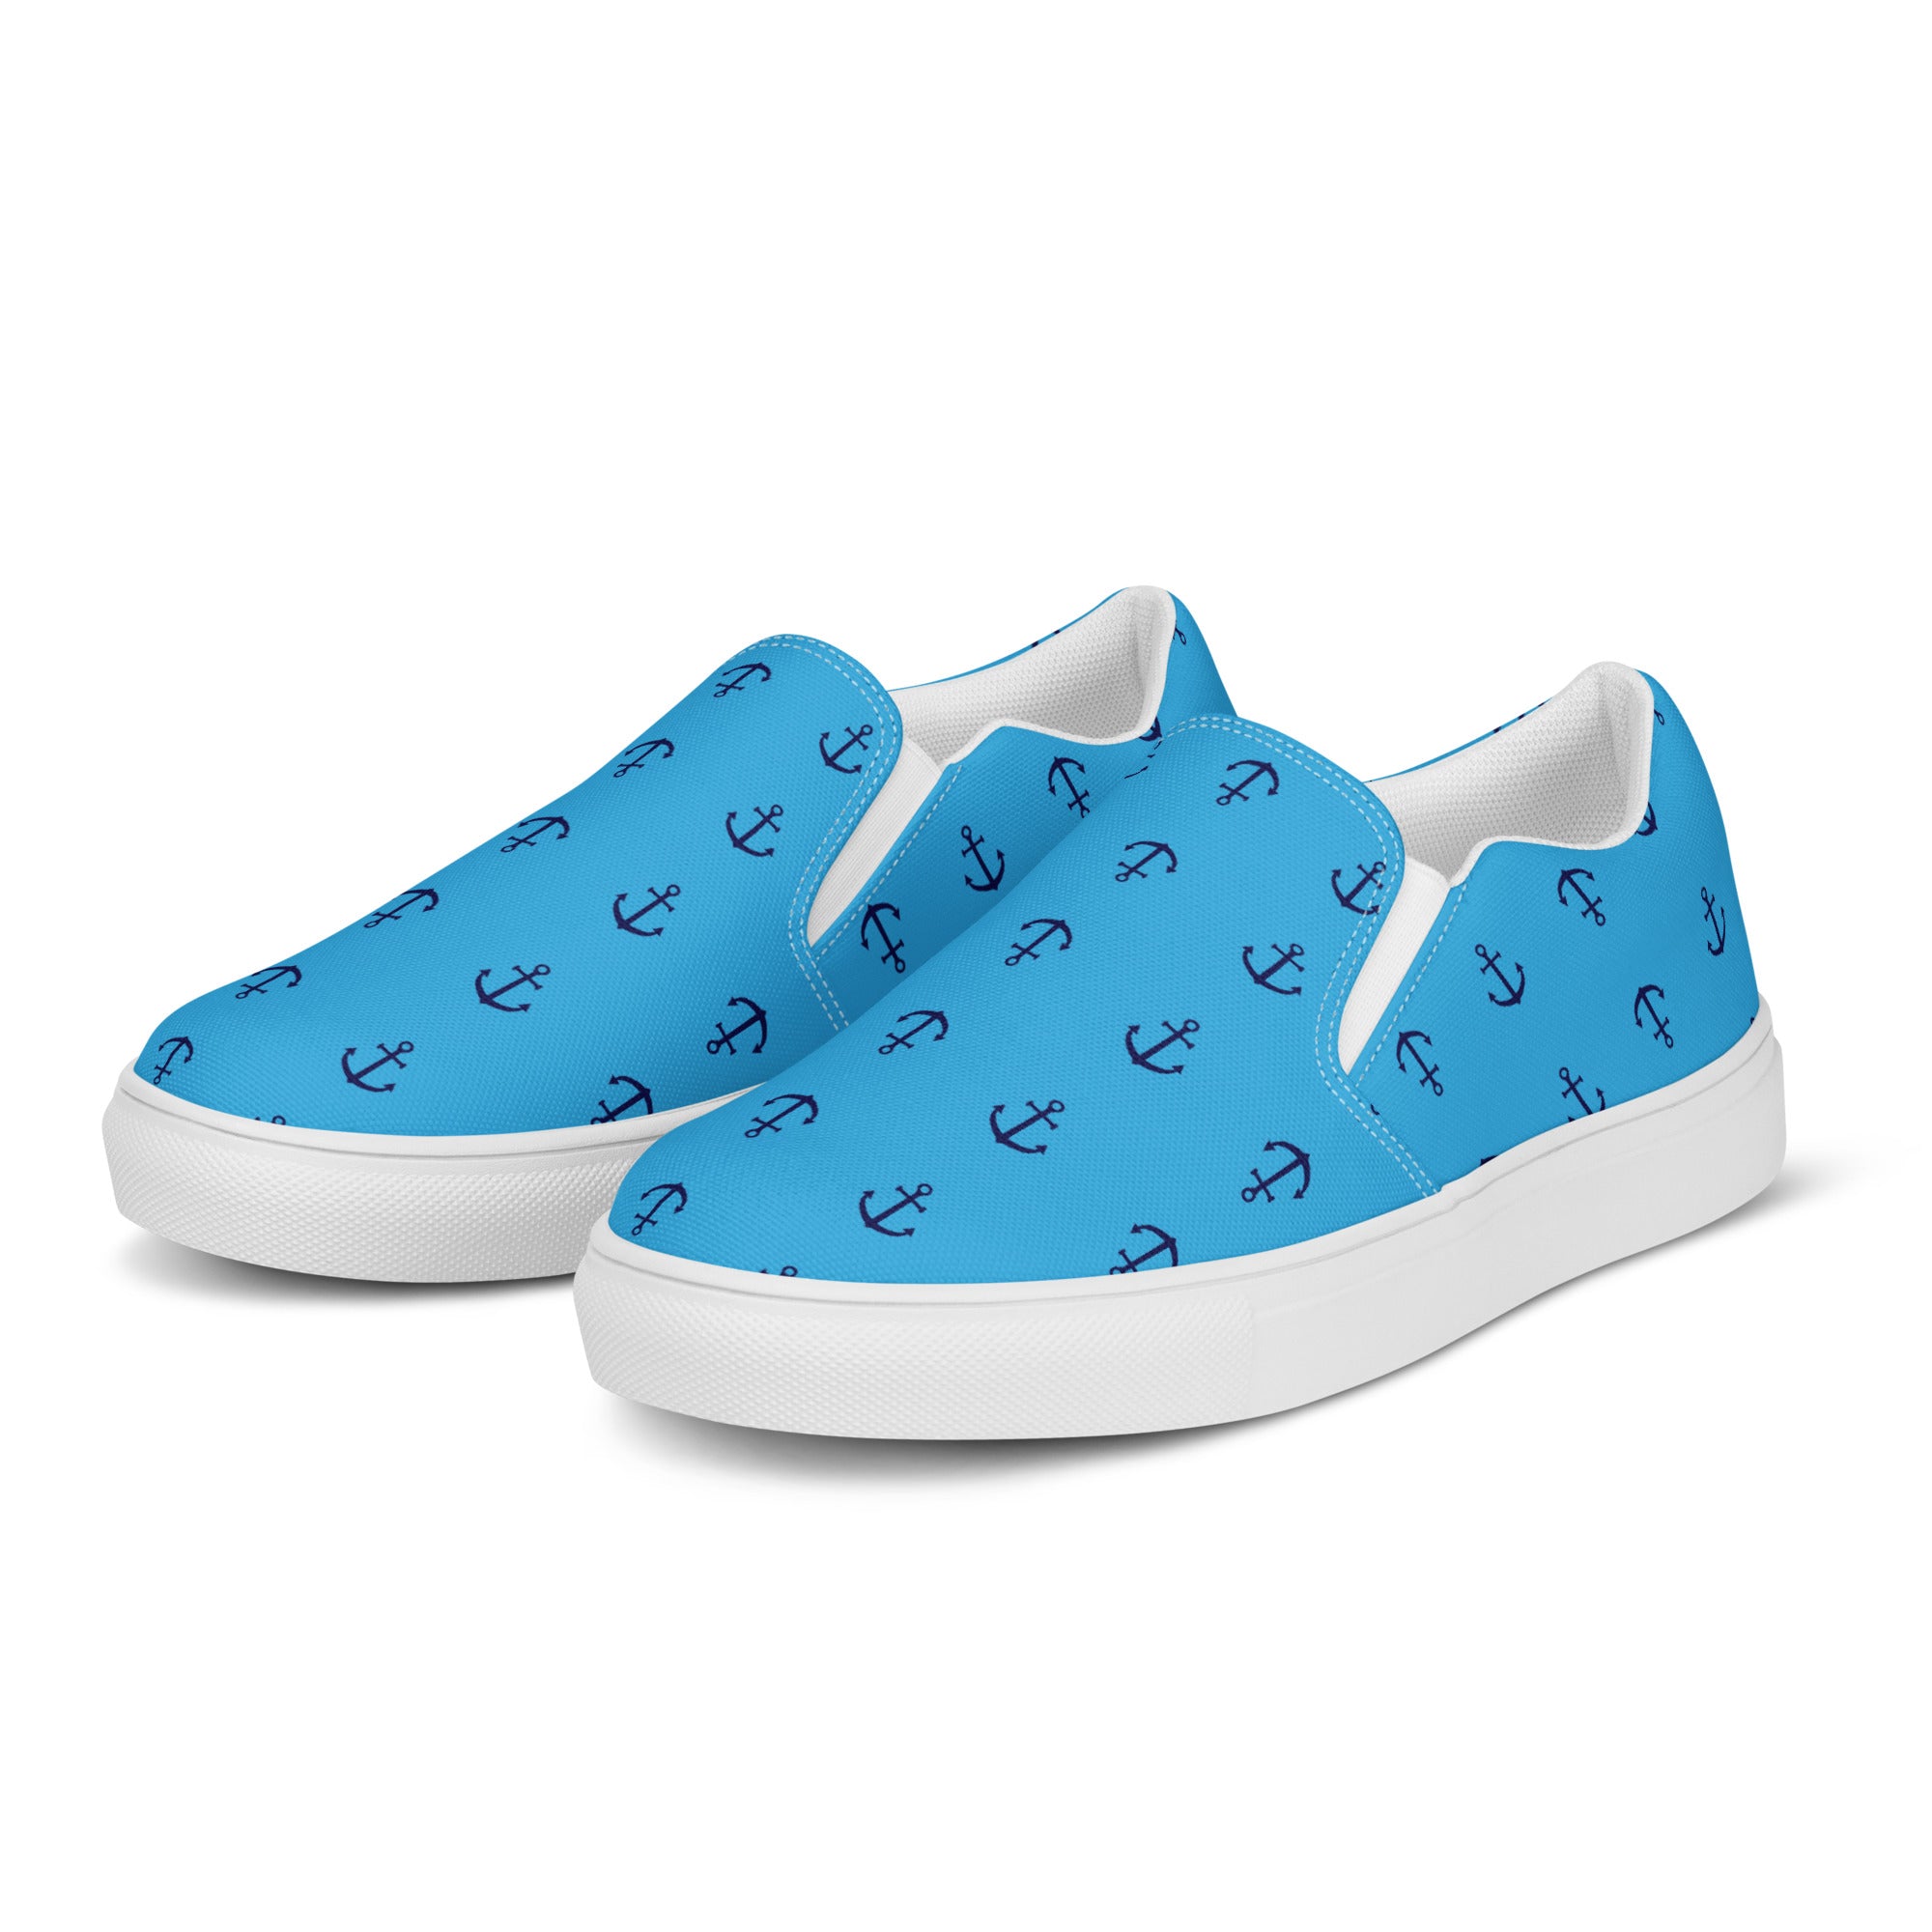 "The Avalons" Women’s Slip-on Canvas Shoes